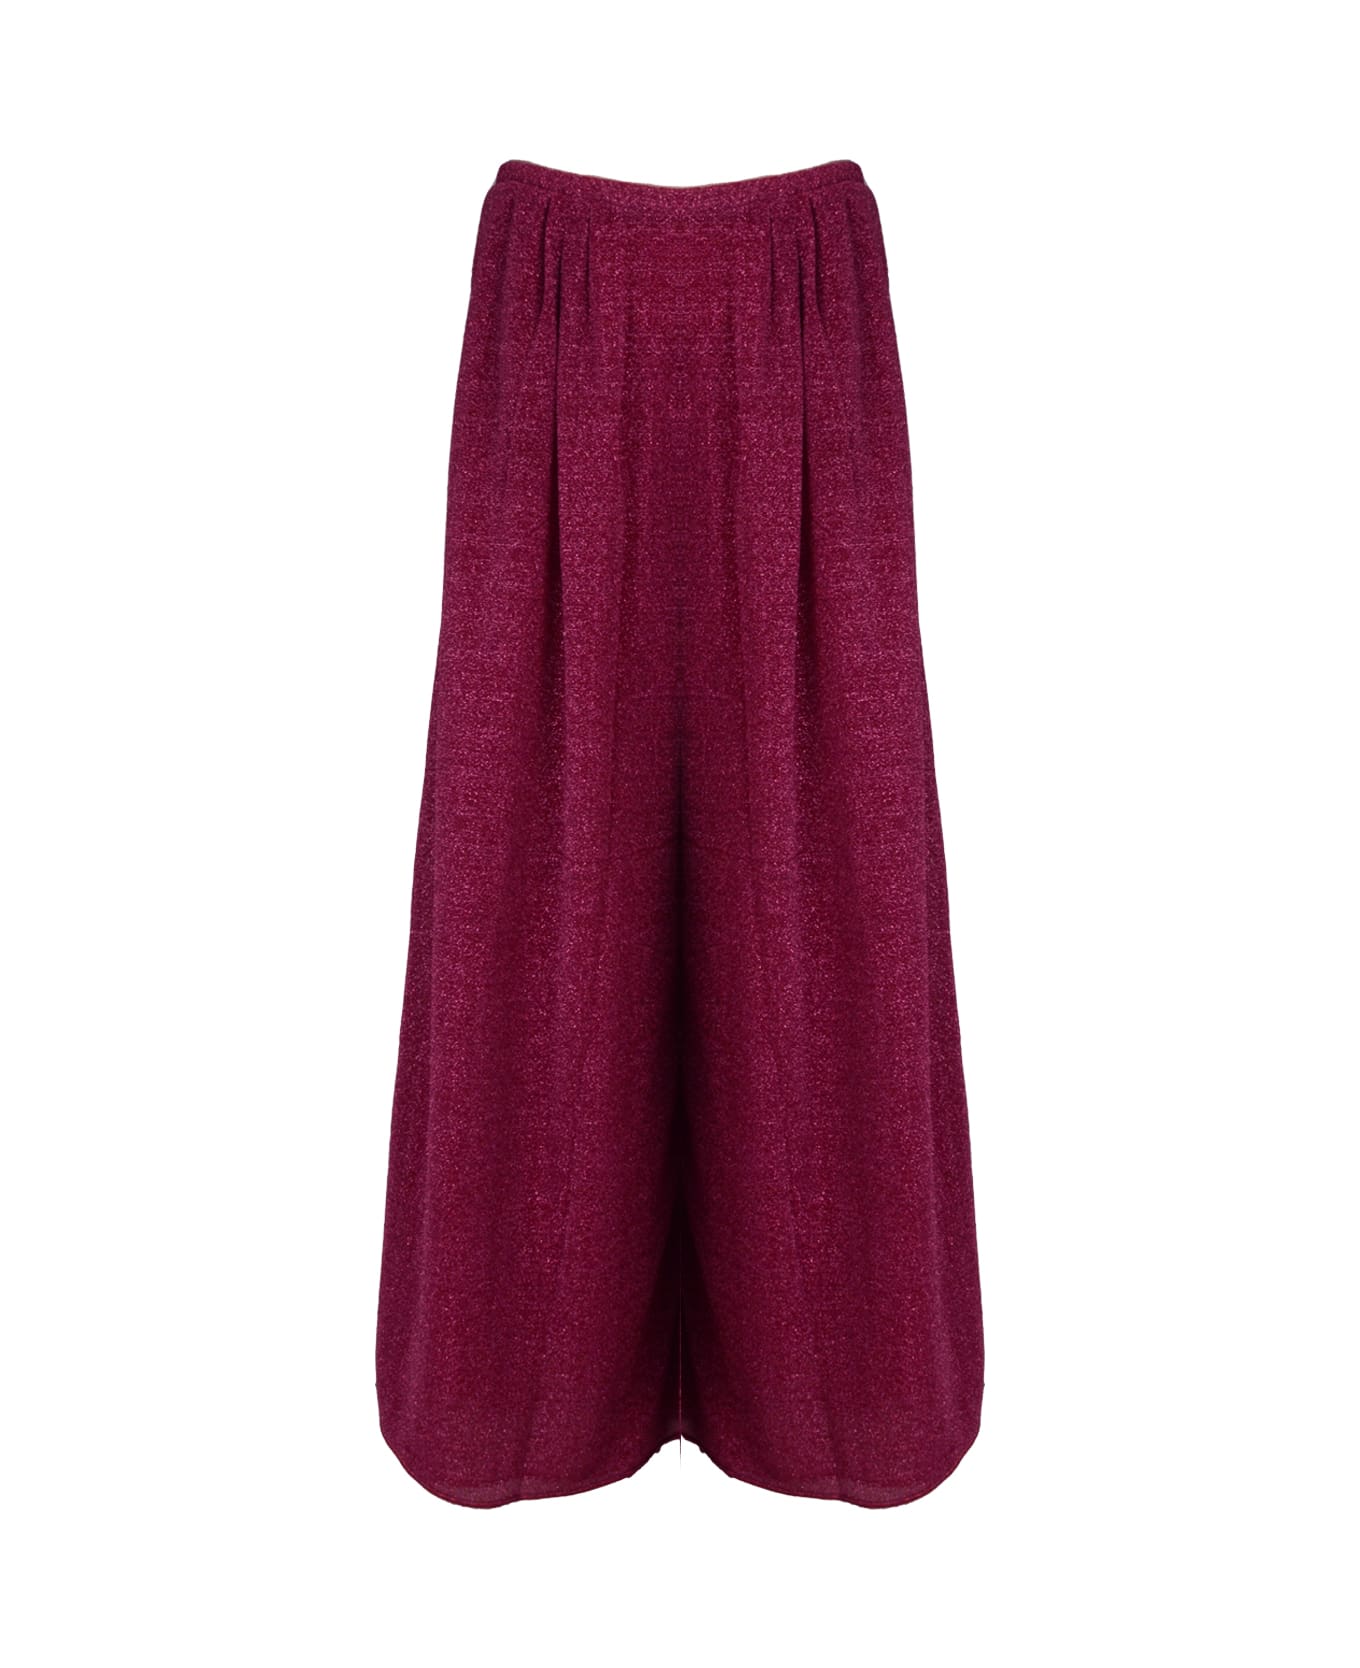 Oseree Pants - Red